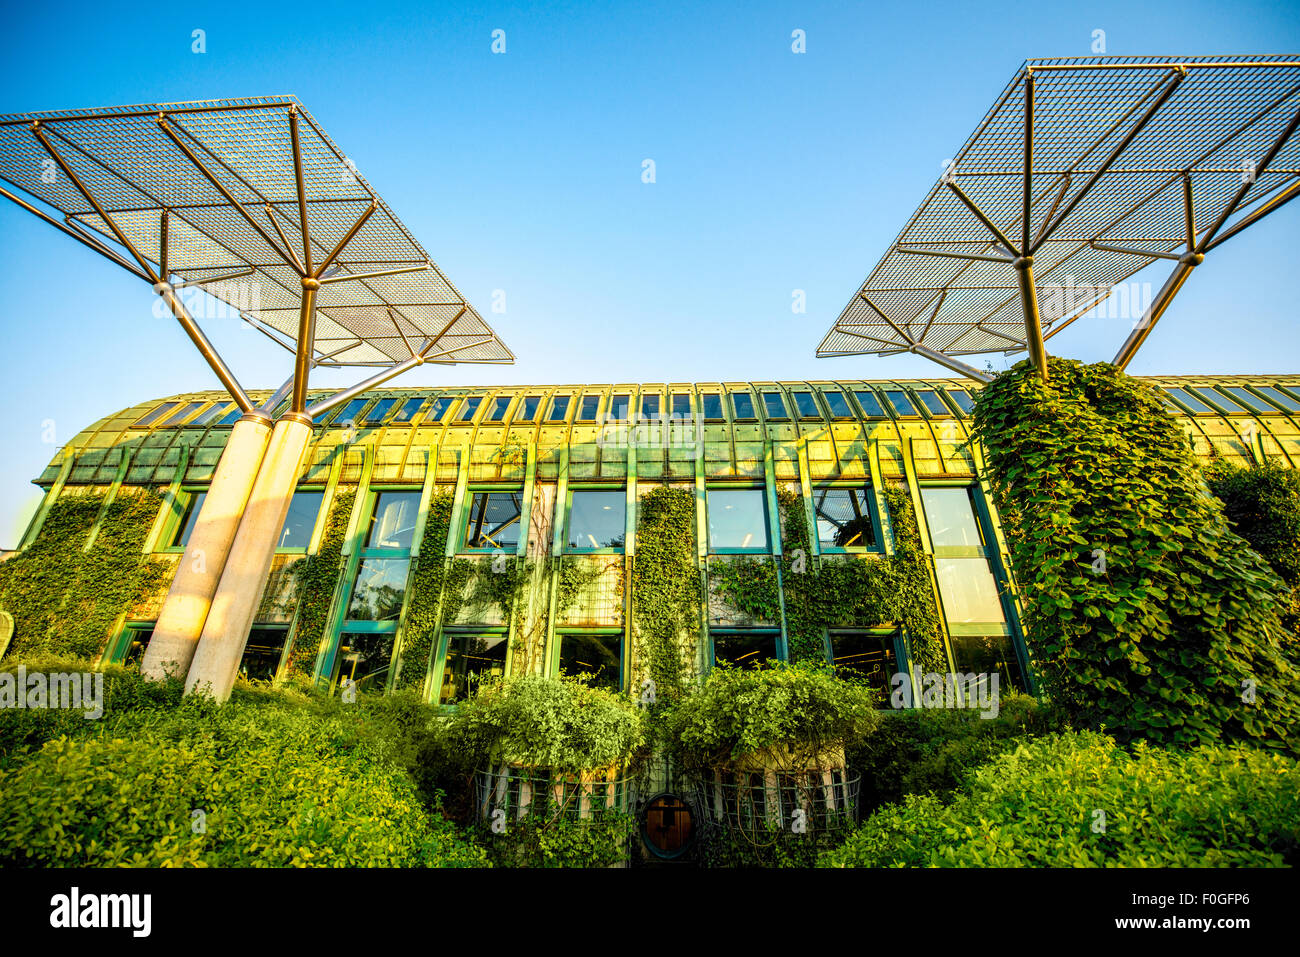 Update Pollinate Elucidation University of Warsaw library in Poland Stock Photo - Alamy